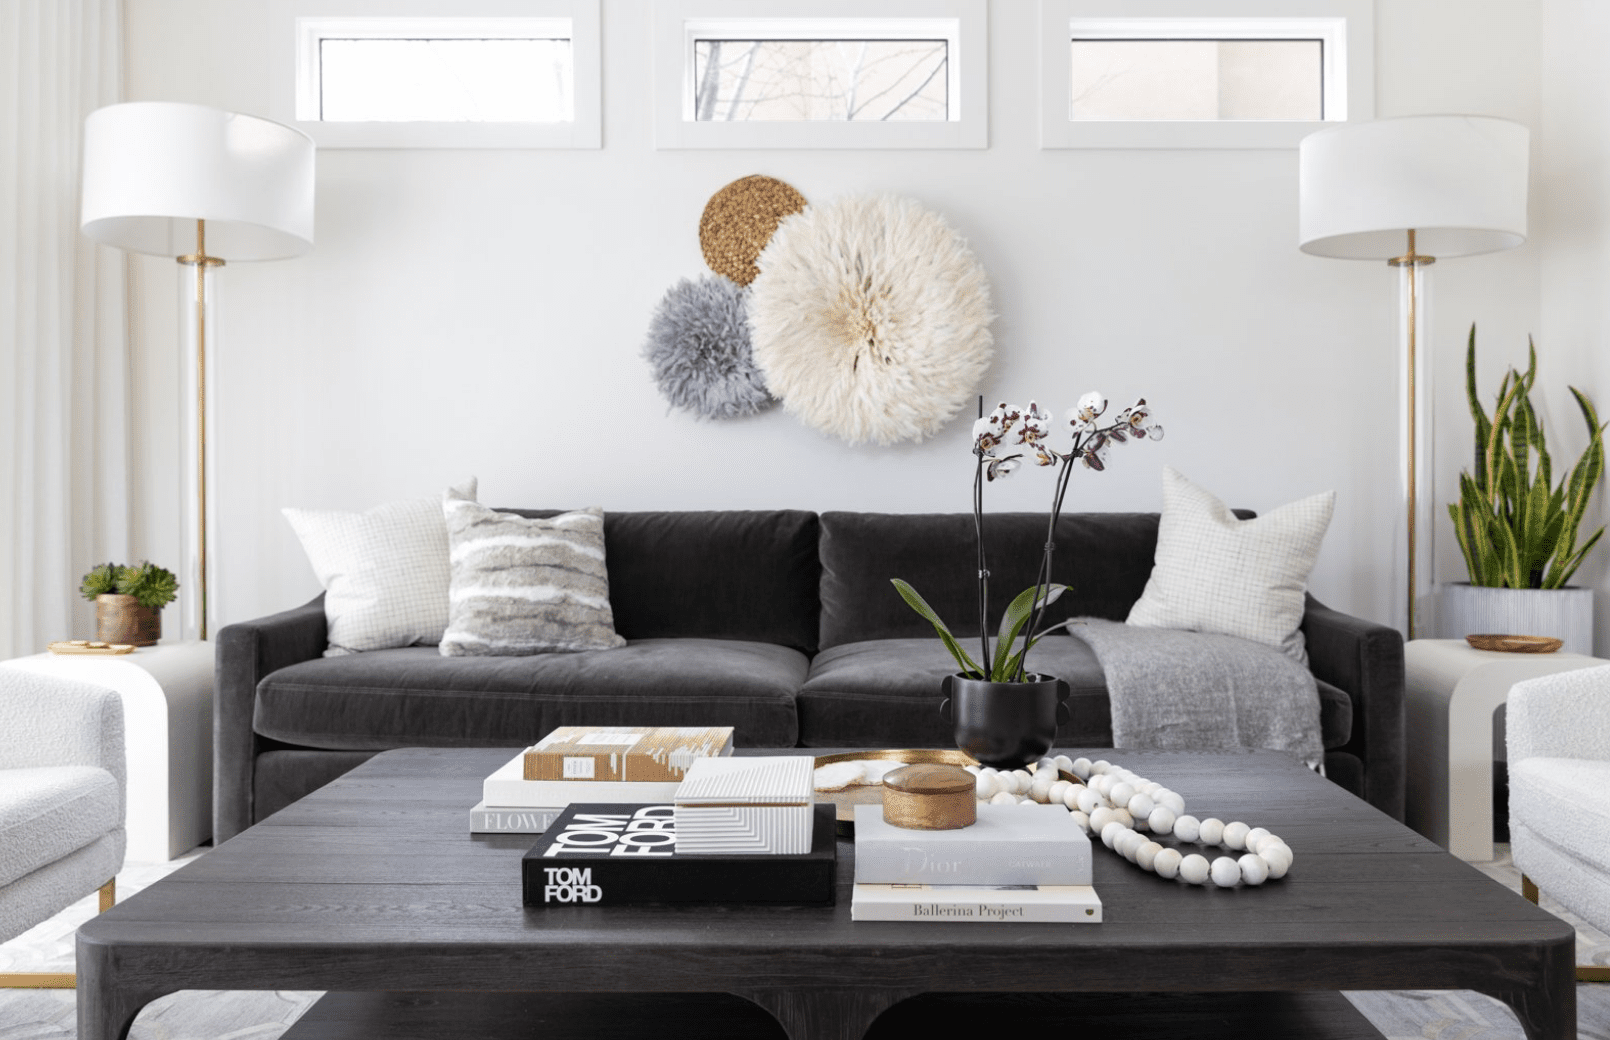 40 Subtle Yet Stylish Ideas For Gray Sofas In The Living Room Regarding Dark Grey Loveseat Sofas (View 8 of 15)